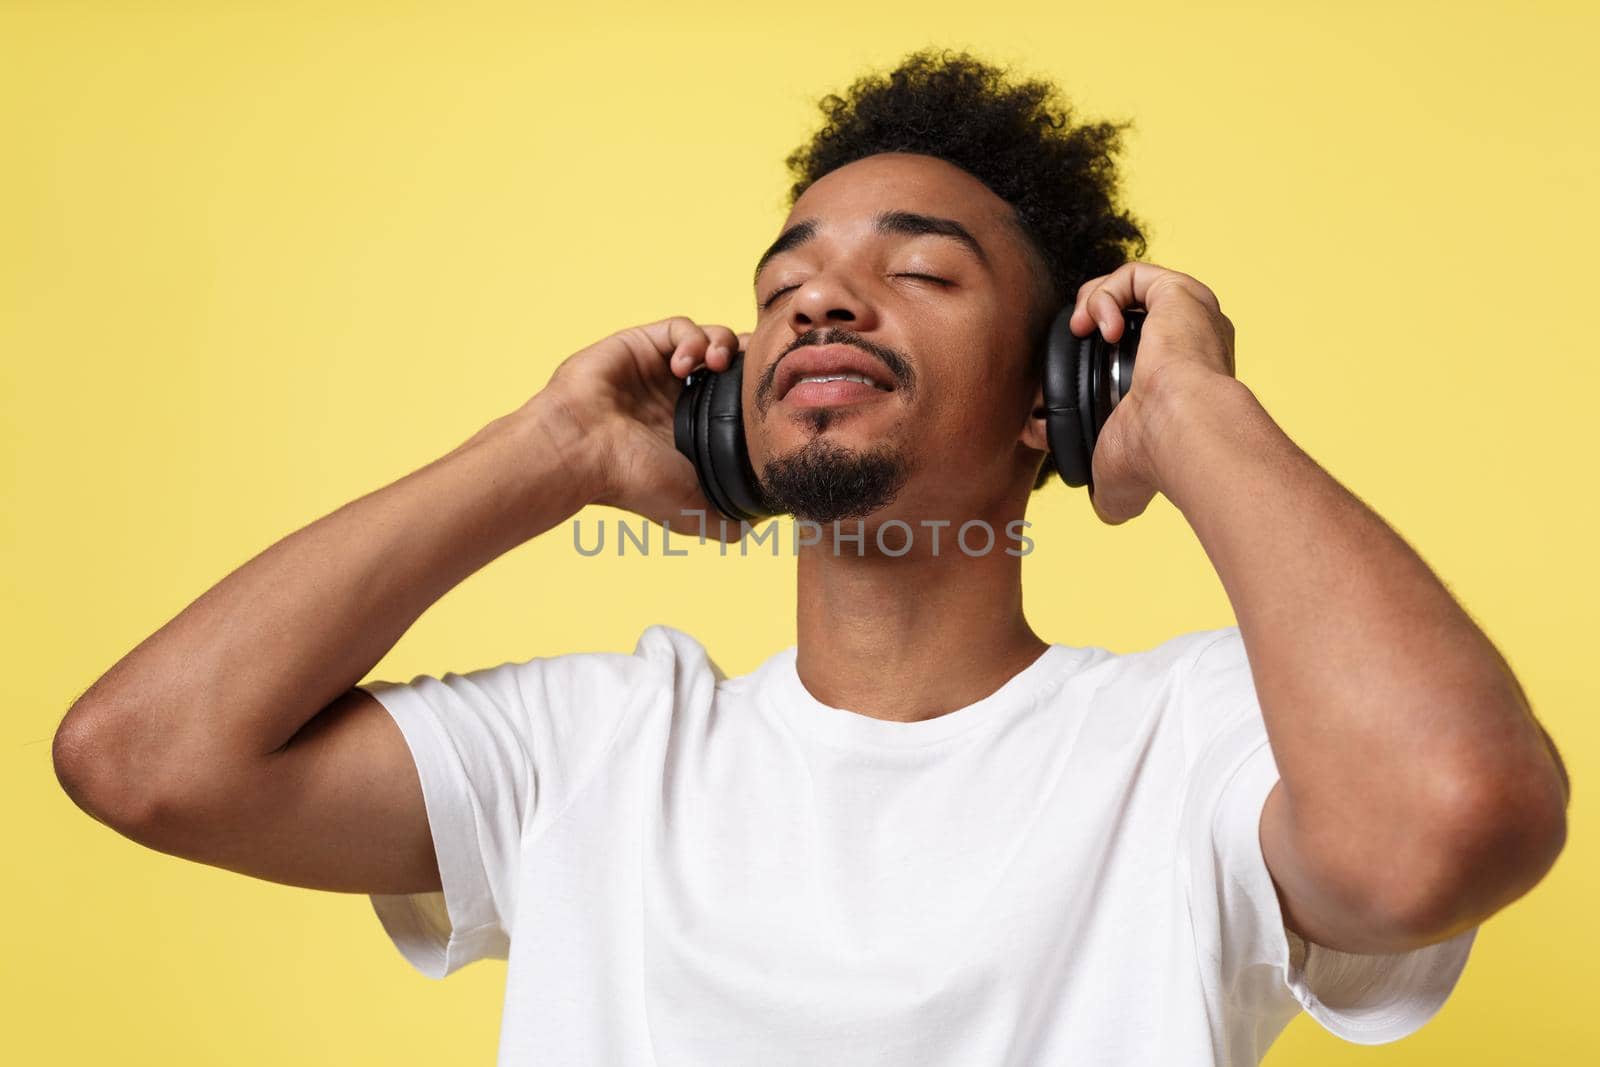 Attractive African American man with headphones listen to music. Isolated over yellow gold background